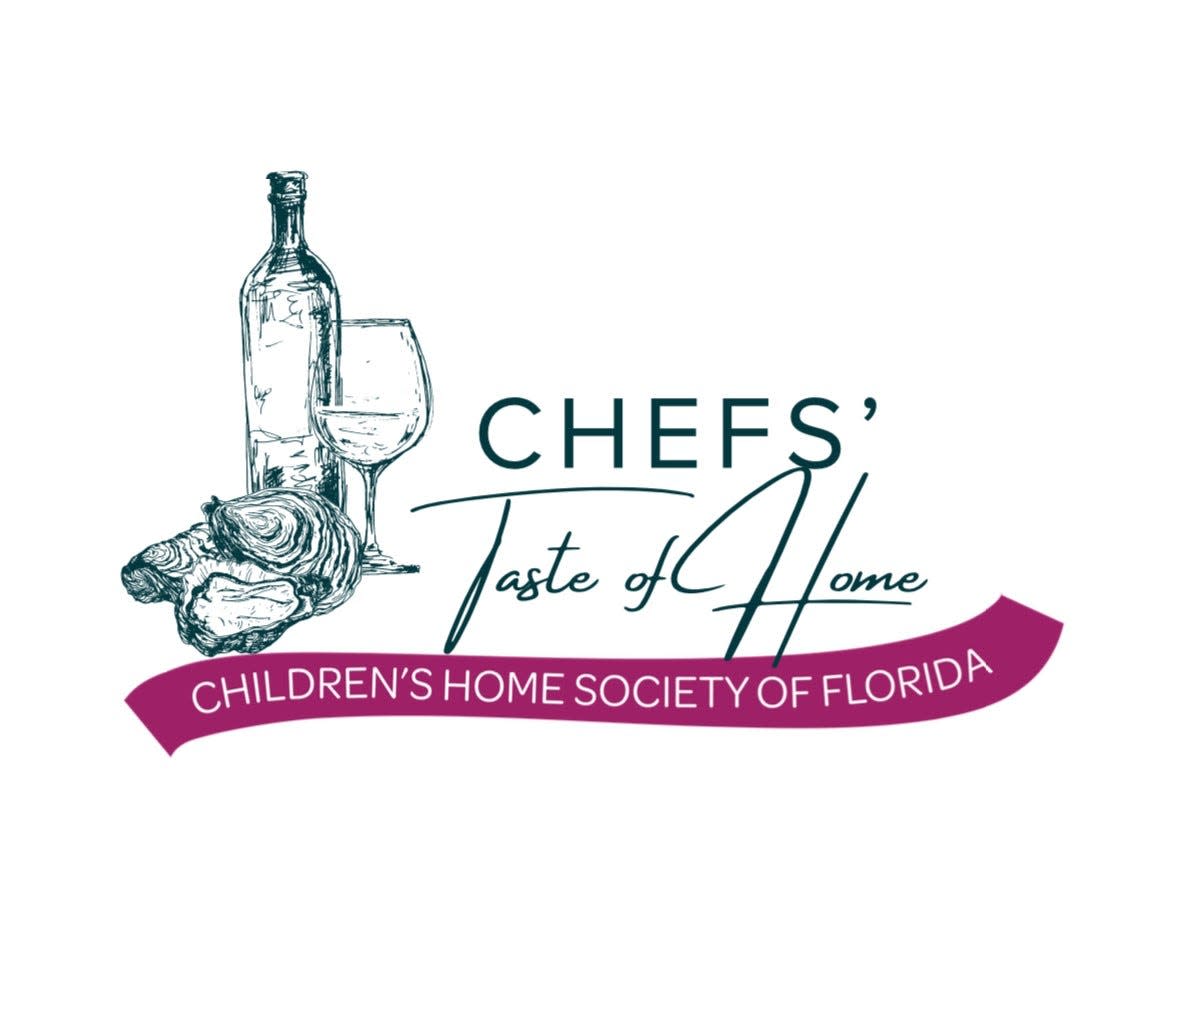 The inaugural Chefs' Taste of Home will be held from 1 p.m. to 5 p.m. on Saturday, April 27.